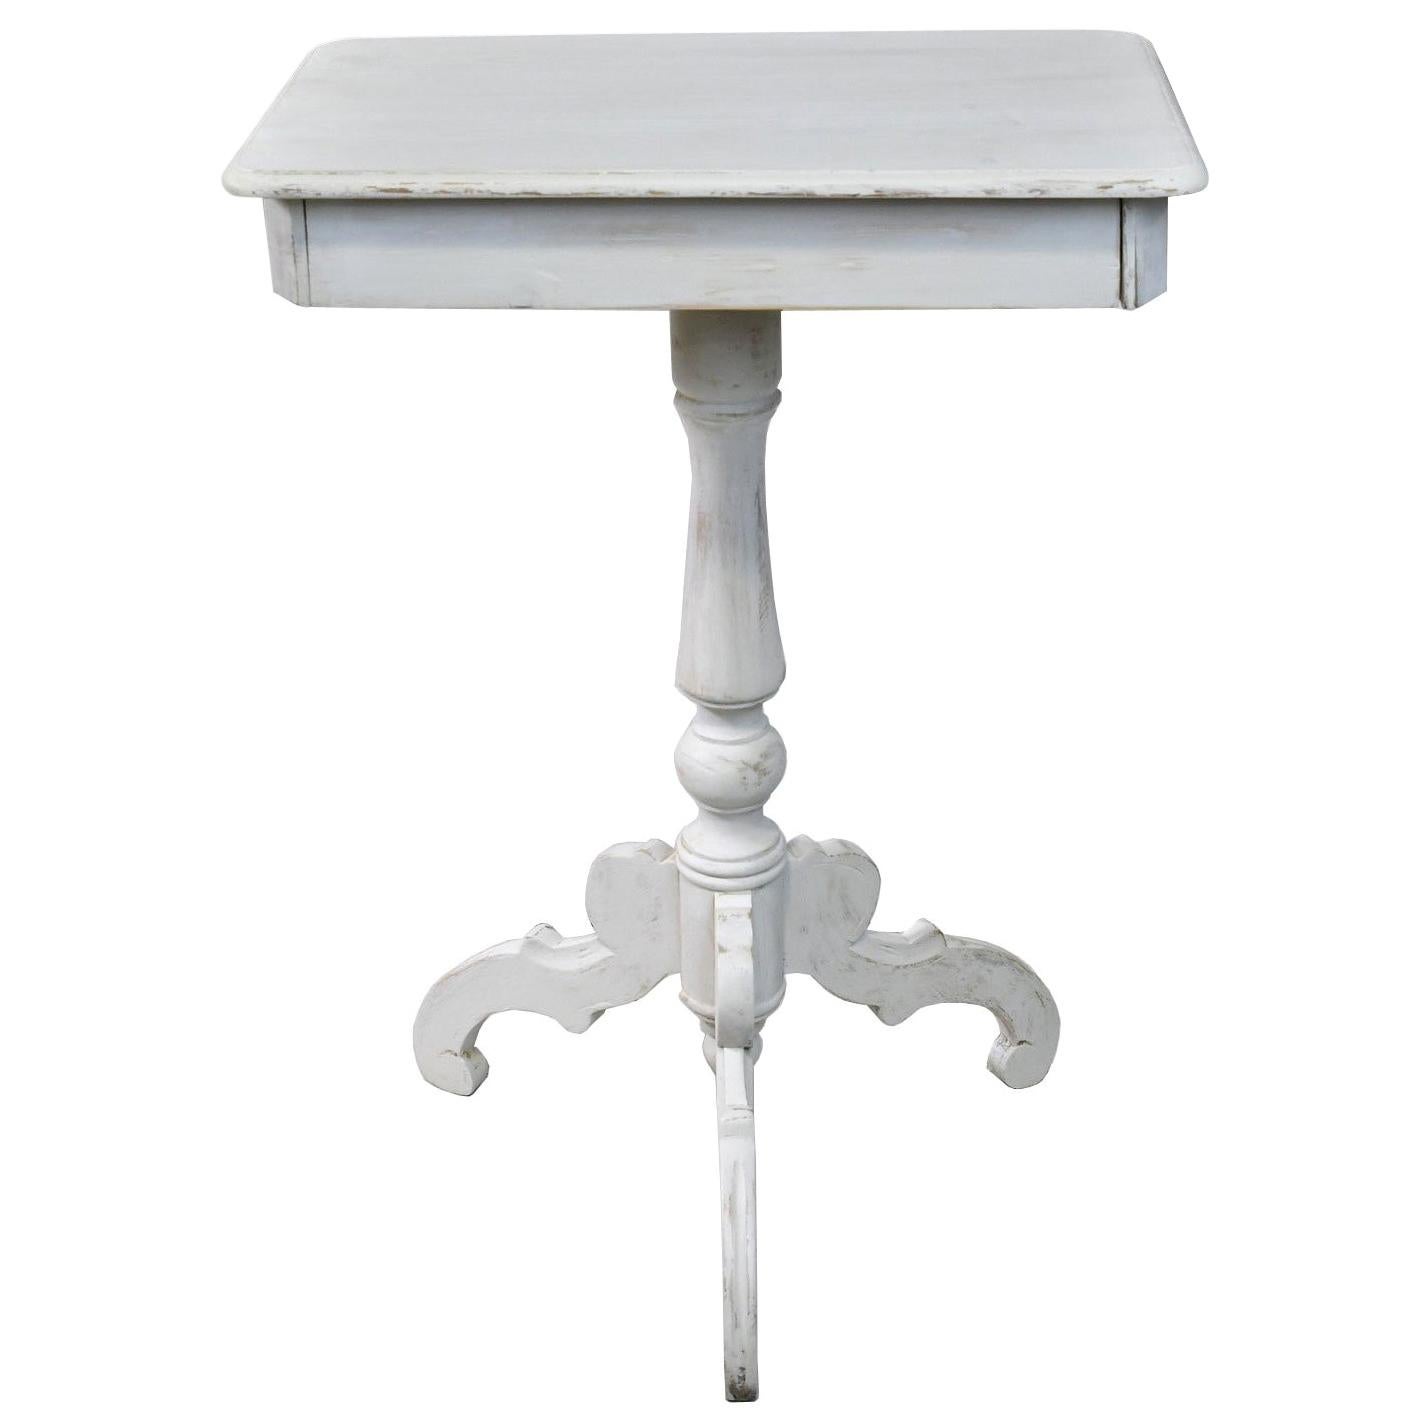 Swedish Gustavian End Table on Tri-foot Pedestal w/ Grey/White Paint, c. 1825 For Sale